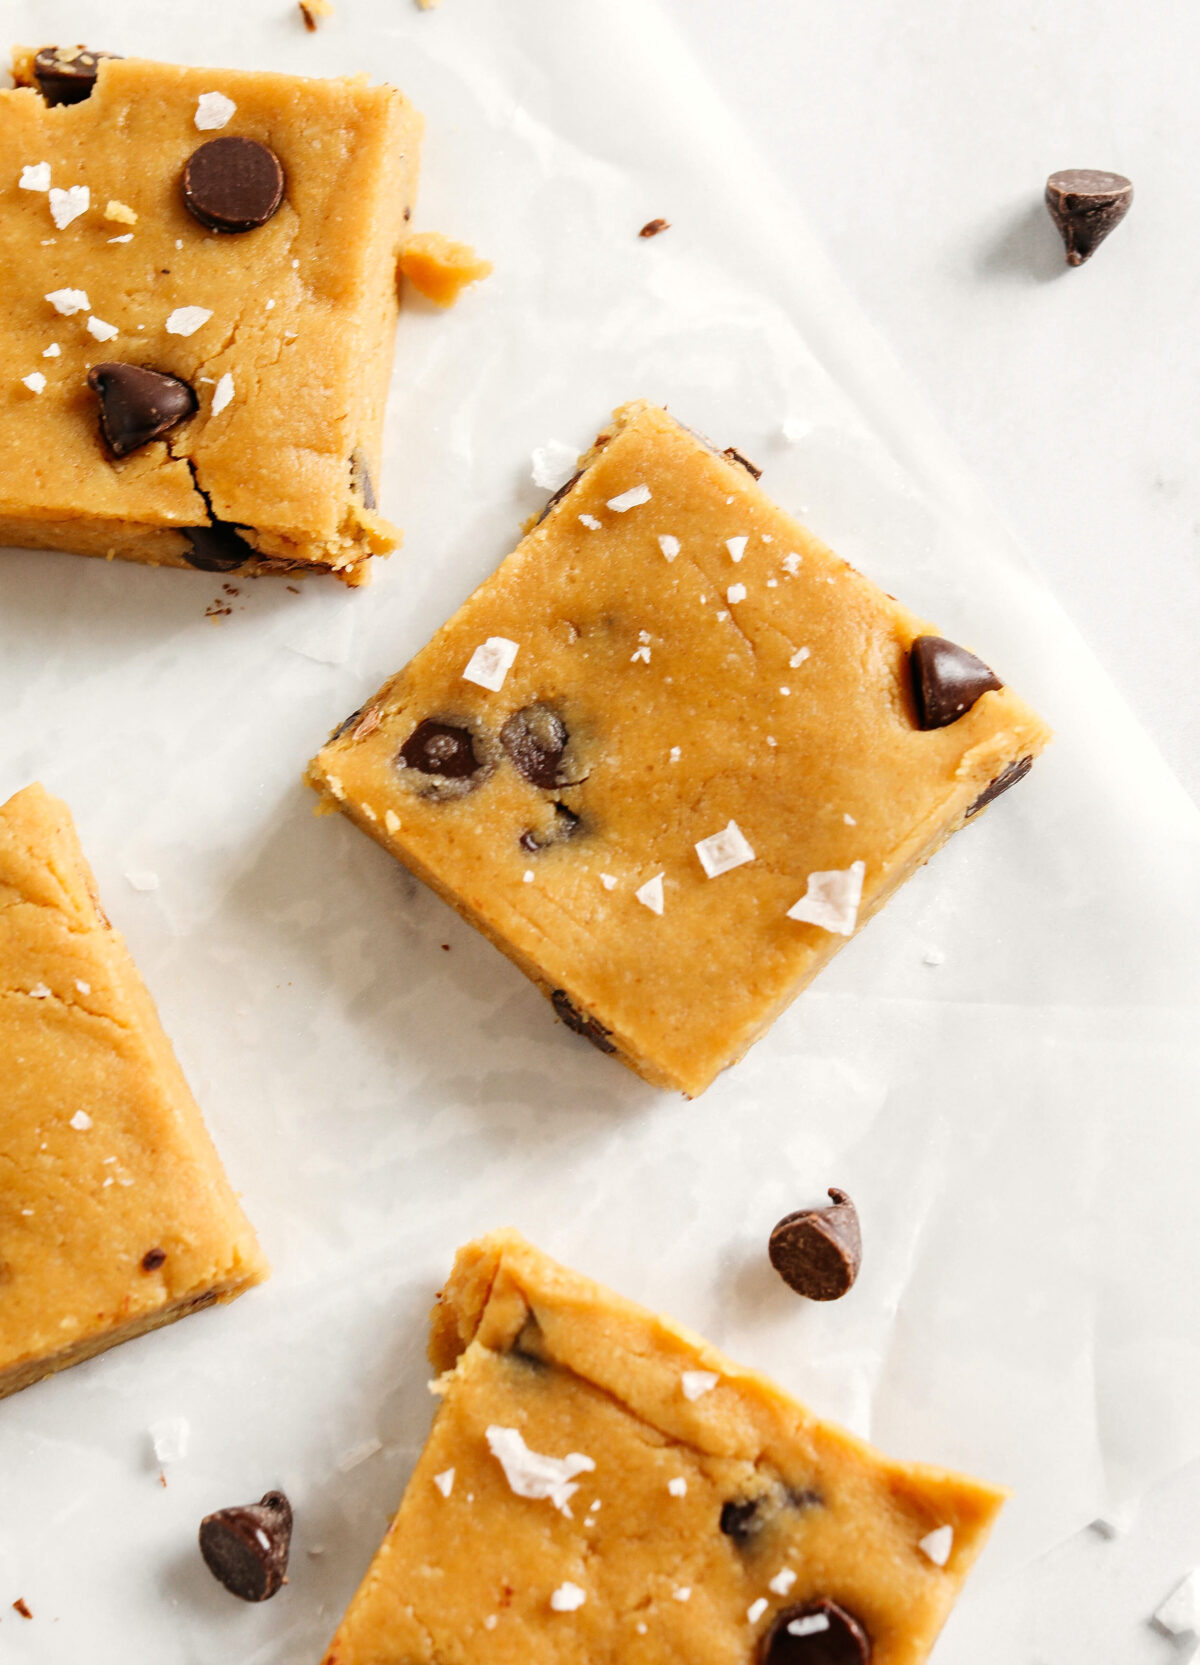 These EASY Peanut Butter Protein Bars are healthy, delicious and made with just a few simple ingredients with zero baking required!  They come together in under 10 minutes!